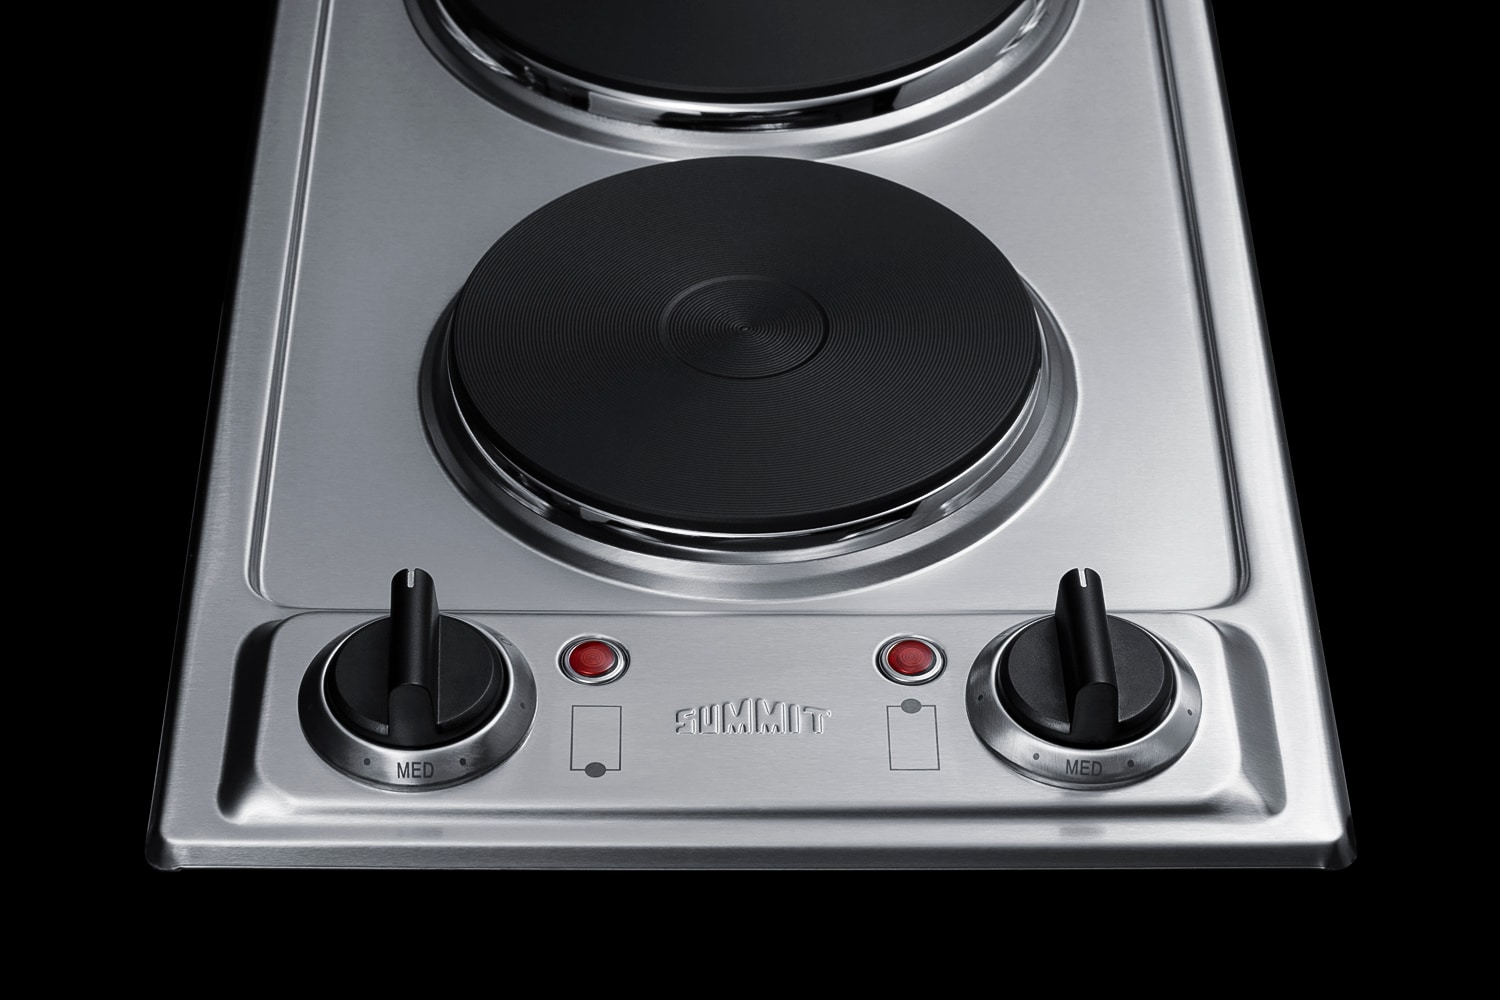 Summit CSD2B115 12 Wide 2 Burner Electric Cooktop with Solid Cast - Stainless Steel